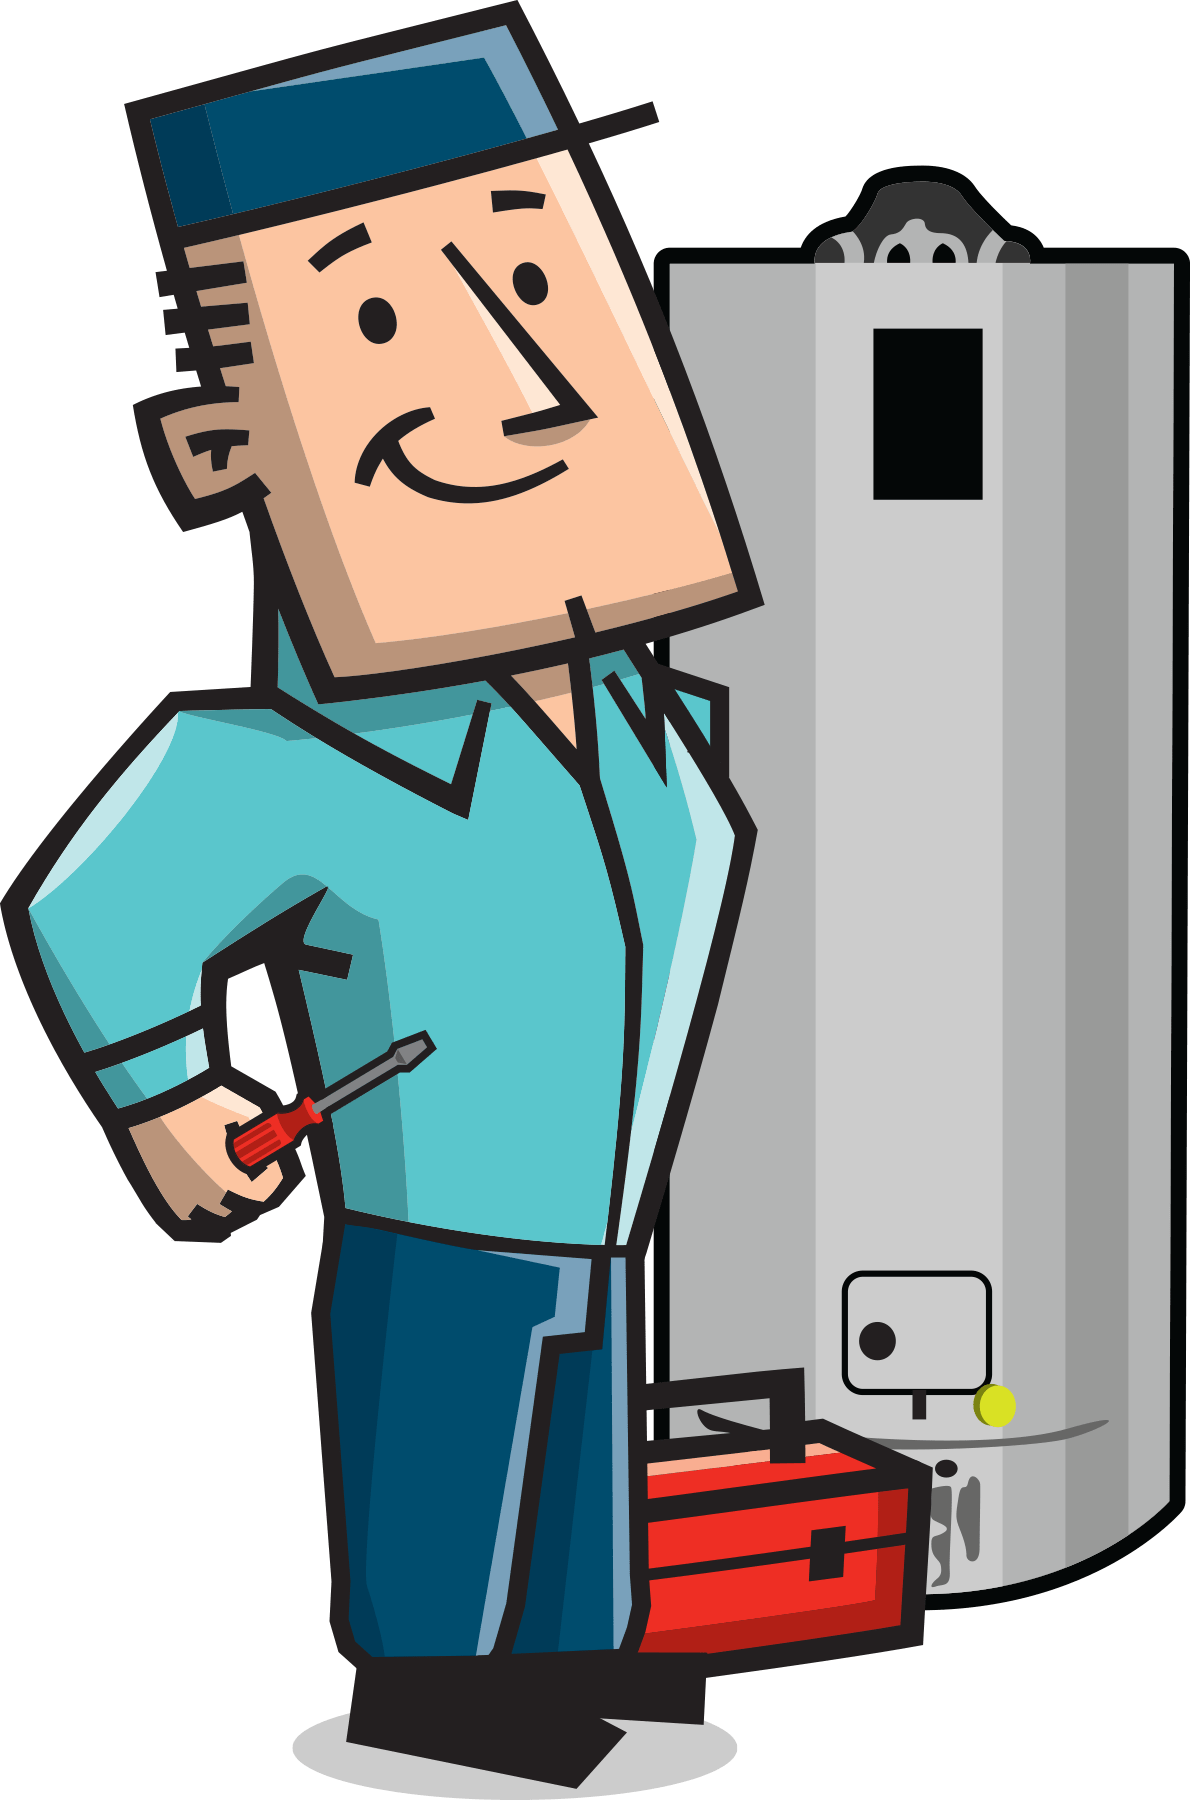 water heater services, water heater maintenance, water heater repair, water heater replacement, water heater installation in Plainfield IL, Naperville IL, and Romeoville IL